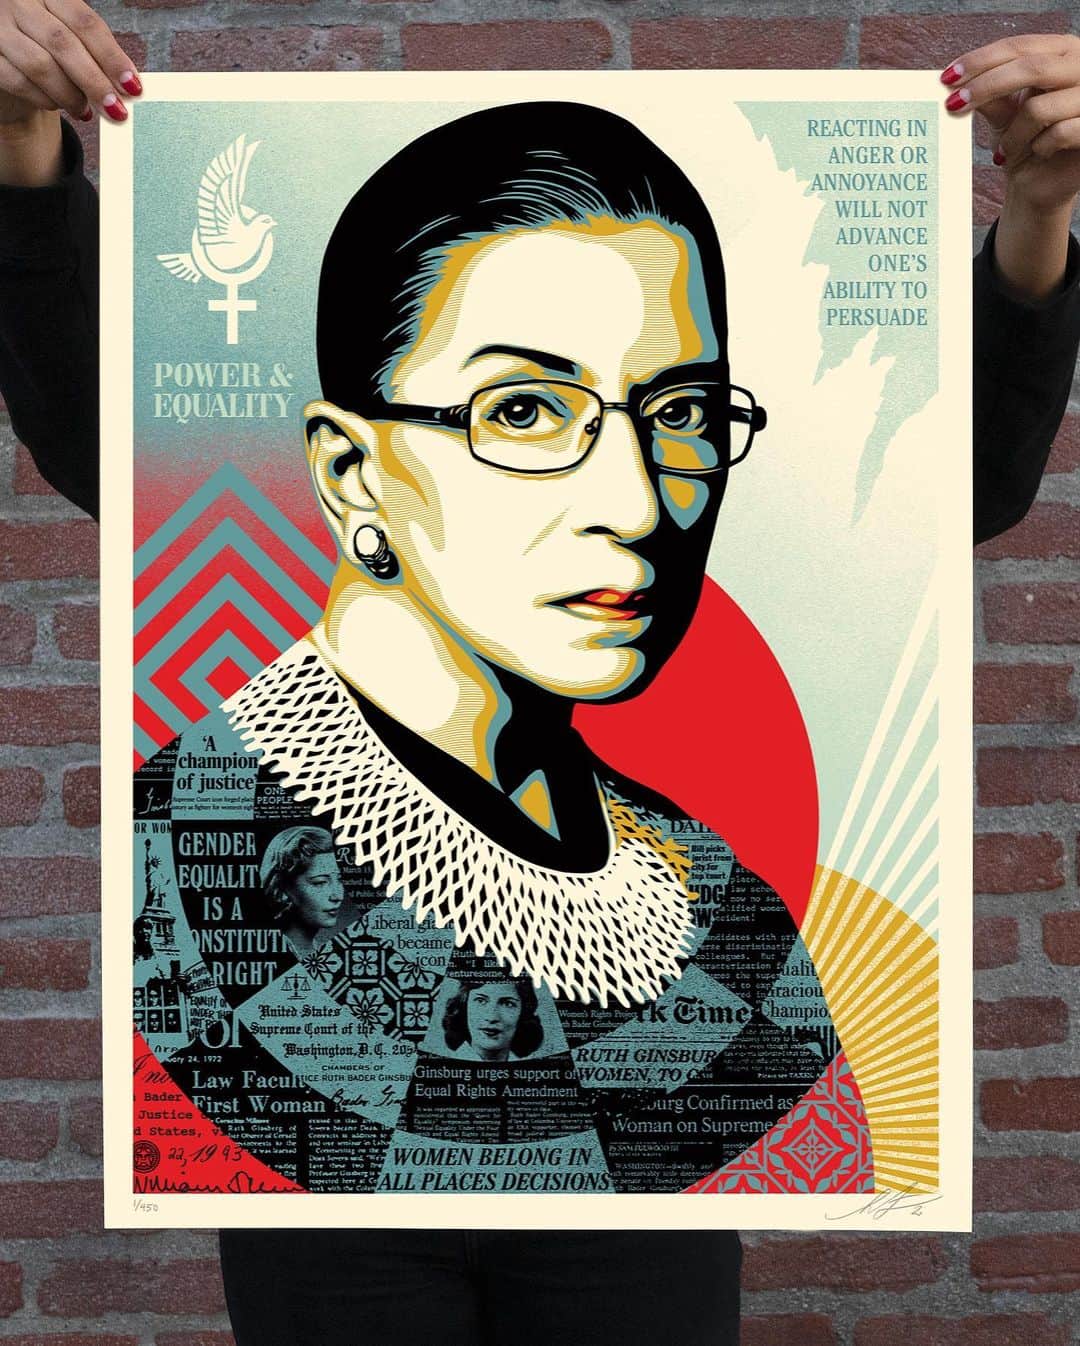 Shepard Faireyのインスタグラム：「Ruth Bader Ginsburg is a hero of mine because she was a low-key radical. She encountered gender discrimination in her personal life which she overcame with perseverance and professional excellence, allowing her to infiltrate the male-dominated system and change that system from within to benefit women's rights and equality under the law. Ginsburg's accomplishments are inspiring, including founding the Women's Rights Project at the American Civil Liberties Union before being appointed to the Supreme Court in 1993. Ginsburg was a champion of justice philosophically, but she worked tirelessly to manifest her ideas about justice in real-world policies. RBG was legendary for her work ethic, getting by on only a few hours of sleep and prolifically writing important opinions, often dissenting powerfully. Justice Ginsburg always stood up for equality with a degree of dignity and civility that was unassailable. I admire her ability to work with people she disagreed with and attempt to win them over rather than react with anger. Ruth Bader Ginsburg, thank you for being a role model in both style and substance. I'm donating proceeds from the sale of these prints to the League of Women Voters because of their continuous work to inform the public to be active participants in democracy. -Shepard  A CHAMPION OF JUSTICE (Ruth Bader Ginsburg). Screen print on thick cream Speckletone paper. Original Photo by @ruvenafanador. Signed by Shepard Fairey. Numbered edition of 500. Proceeds go to @leagueofwomenvoters. Available on Tuesday, March 2nd @ 10 AM (18 x 24) and 1 PM (24 x 36) PT at https://store.obeygiant.com/collections/prints. Max order: 1 per customer/household. International customers are responsible for import fees due upon delivery.⁣ Shipping may be delayed due to COVID19. ALL SALES FINAL.   18 x 24 inches $80 @ 10am PT 24 x 36 inches $120 @ 1pm PT」